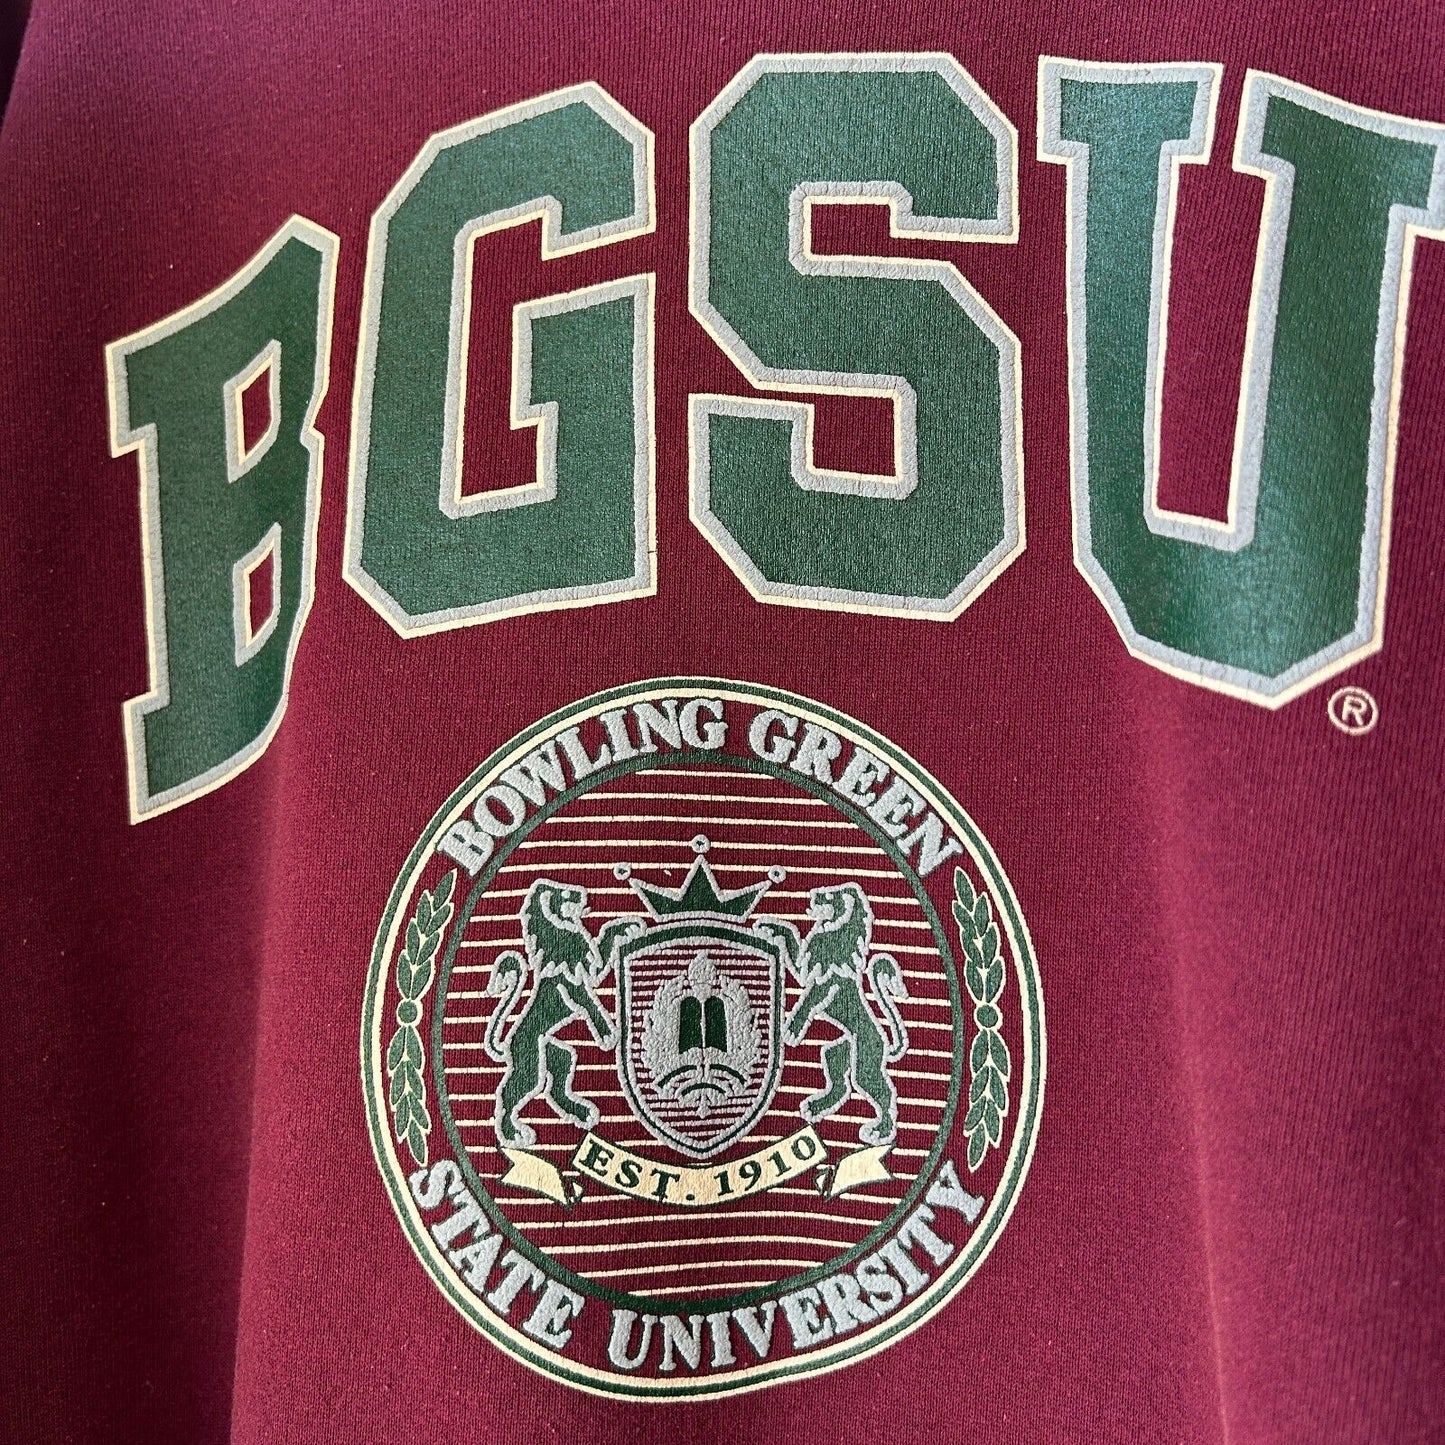 VINTAGE 90s | Bowling Green State University Crest Sweater sz XXL Adult